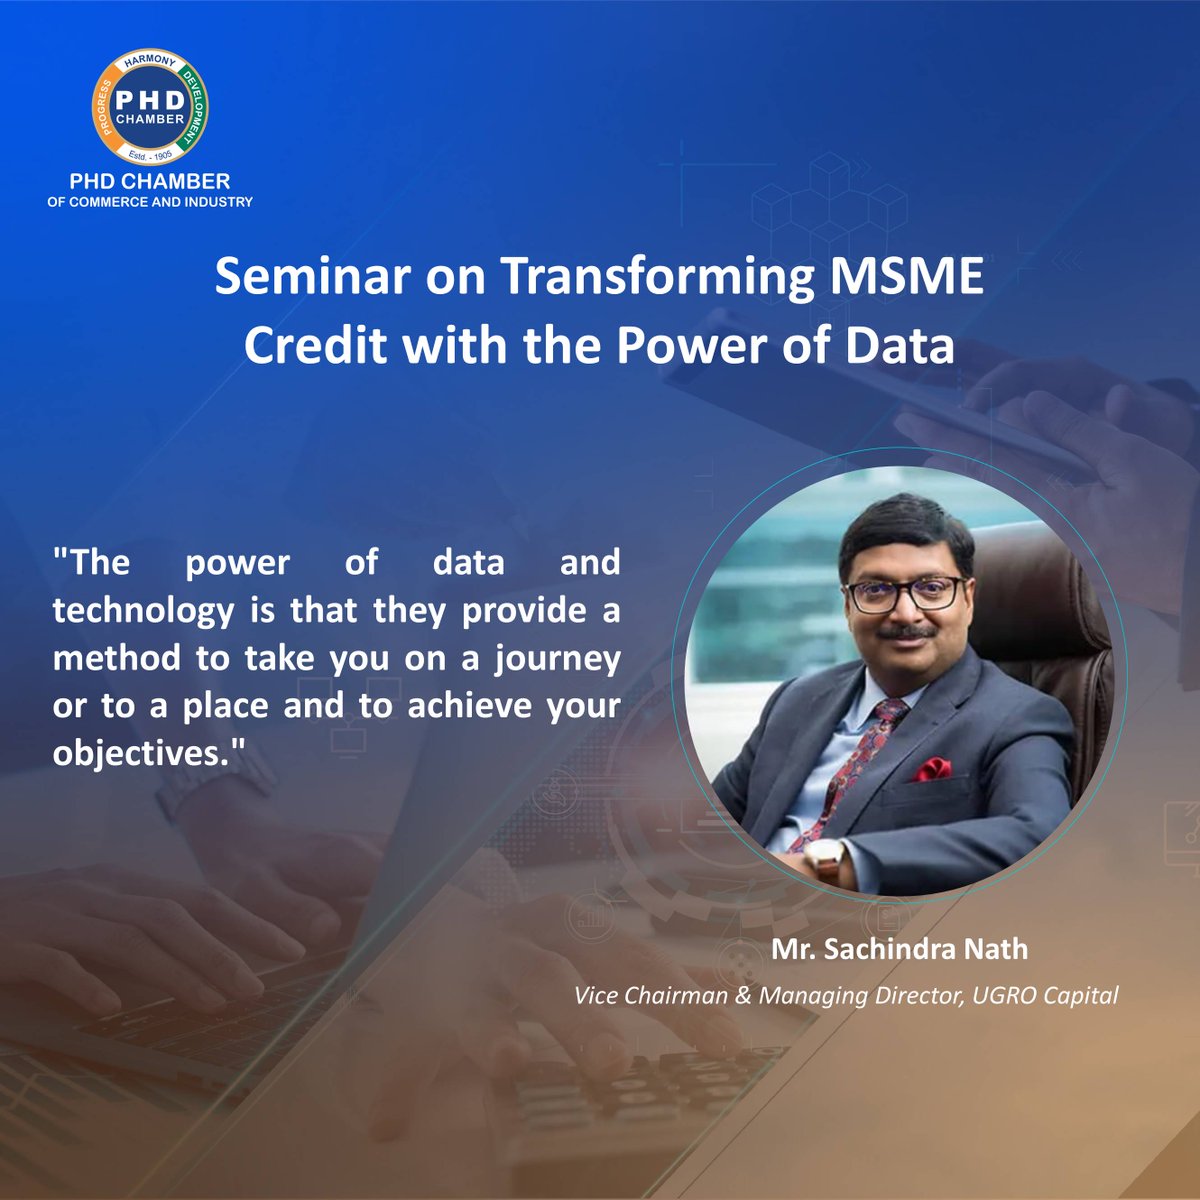 Mr. Sachindra Nath, Vice Chairman & Managing Director, UGRO Capital, expressed his thoughts on data  & technology at the seminar on 'Transforming MSME Credit with the Power of Data' held at the PHD House, New Delhi.
#PHDCCI #MSMECredit #PowerOfData #CapitalMarket #CommodityMarket